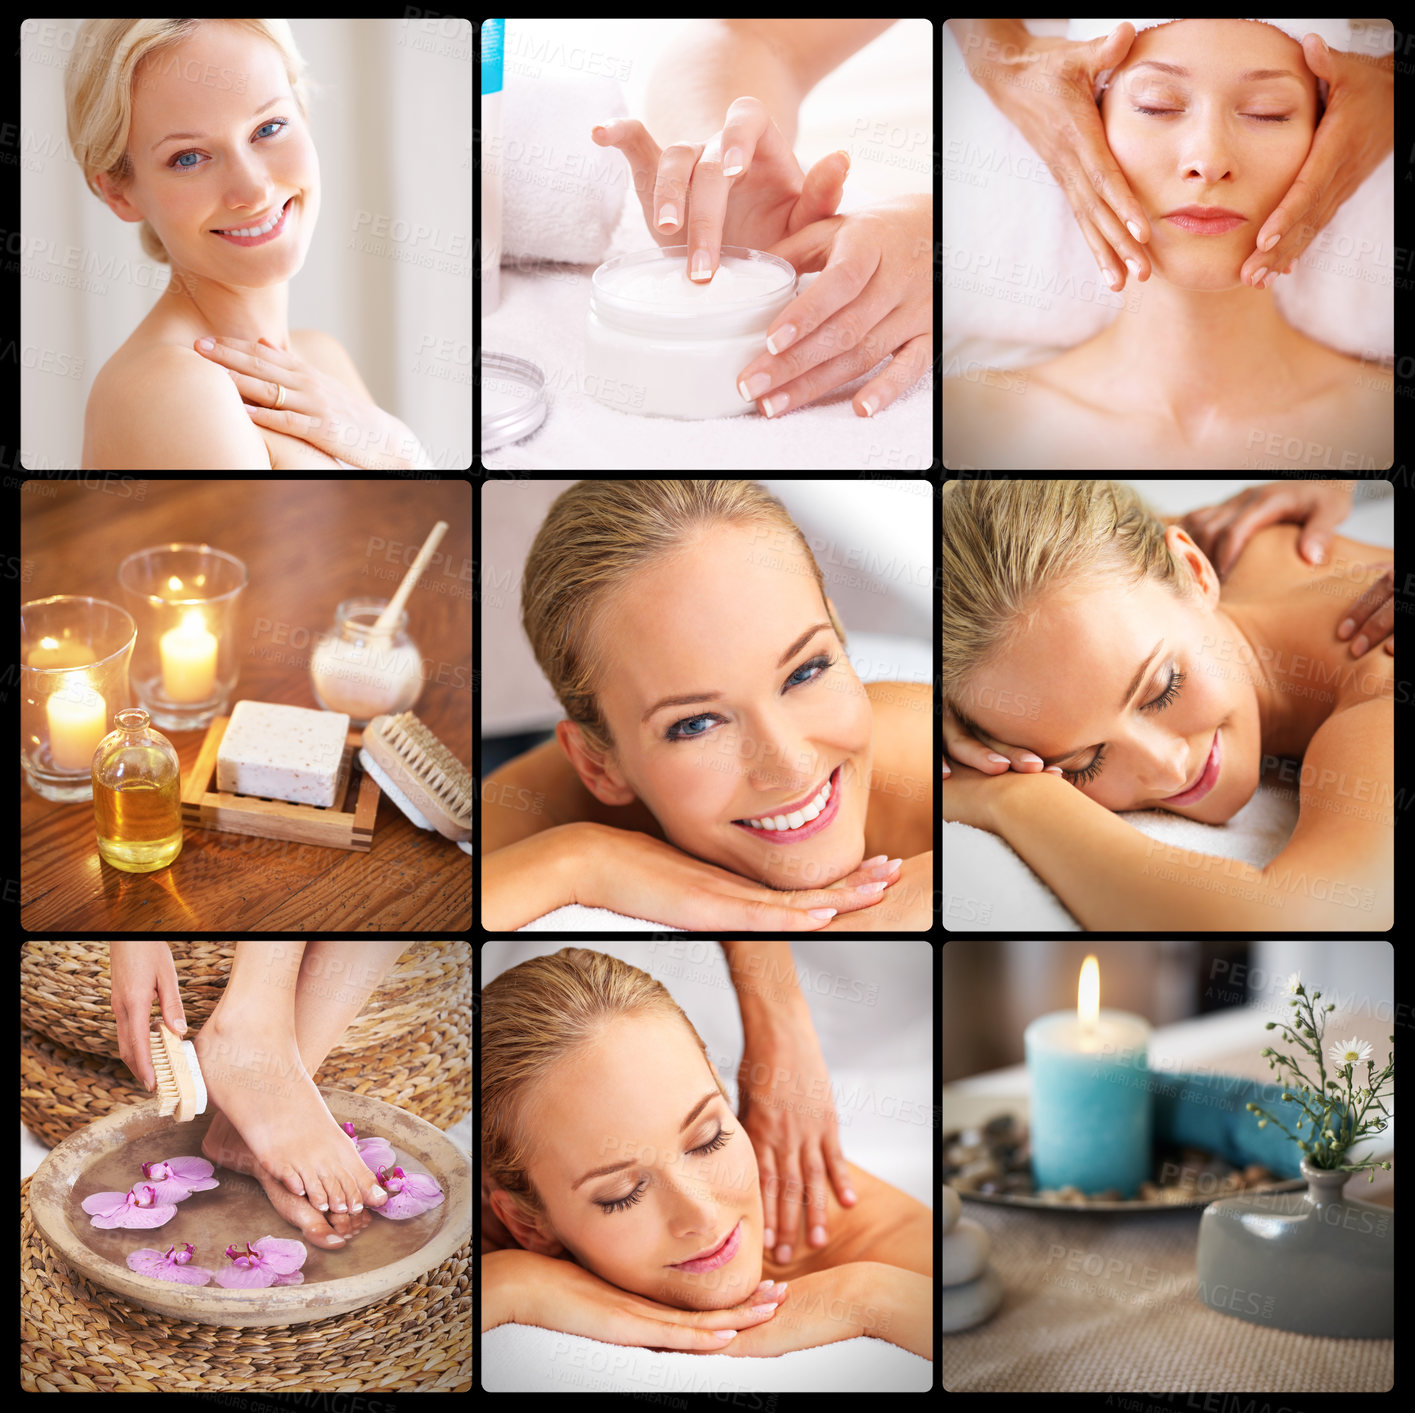 Buy stock photo Collage, portrait or woman in skincare, spa wellness or massage to relax in luxury getaway retreat. Montage, candles or hands as beauty, cosmetology or self care as inspiration, idea or vision